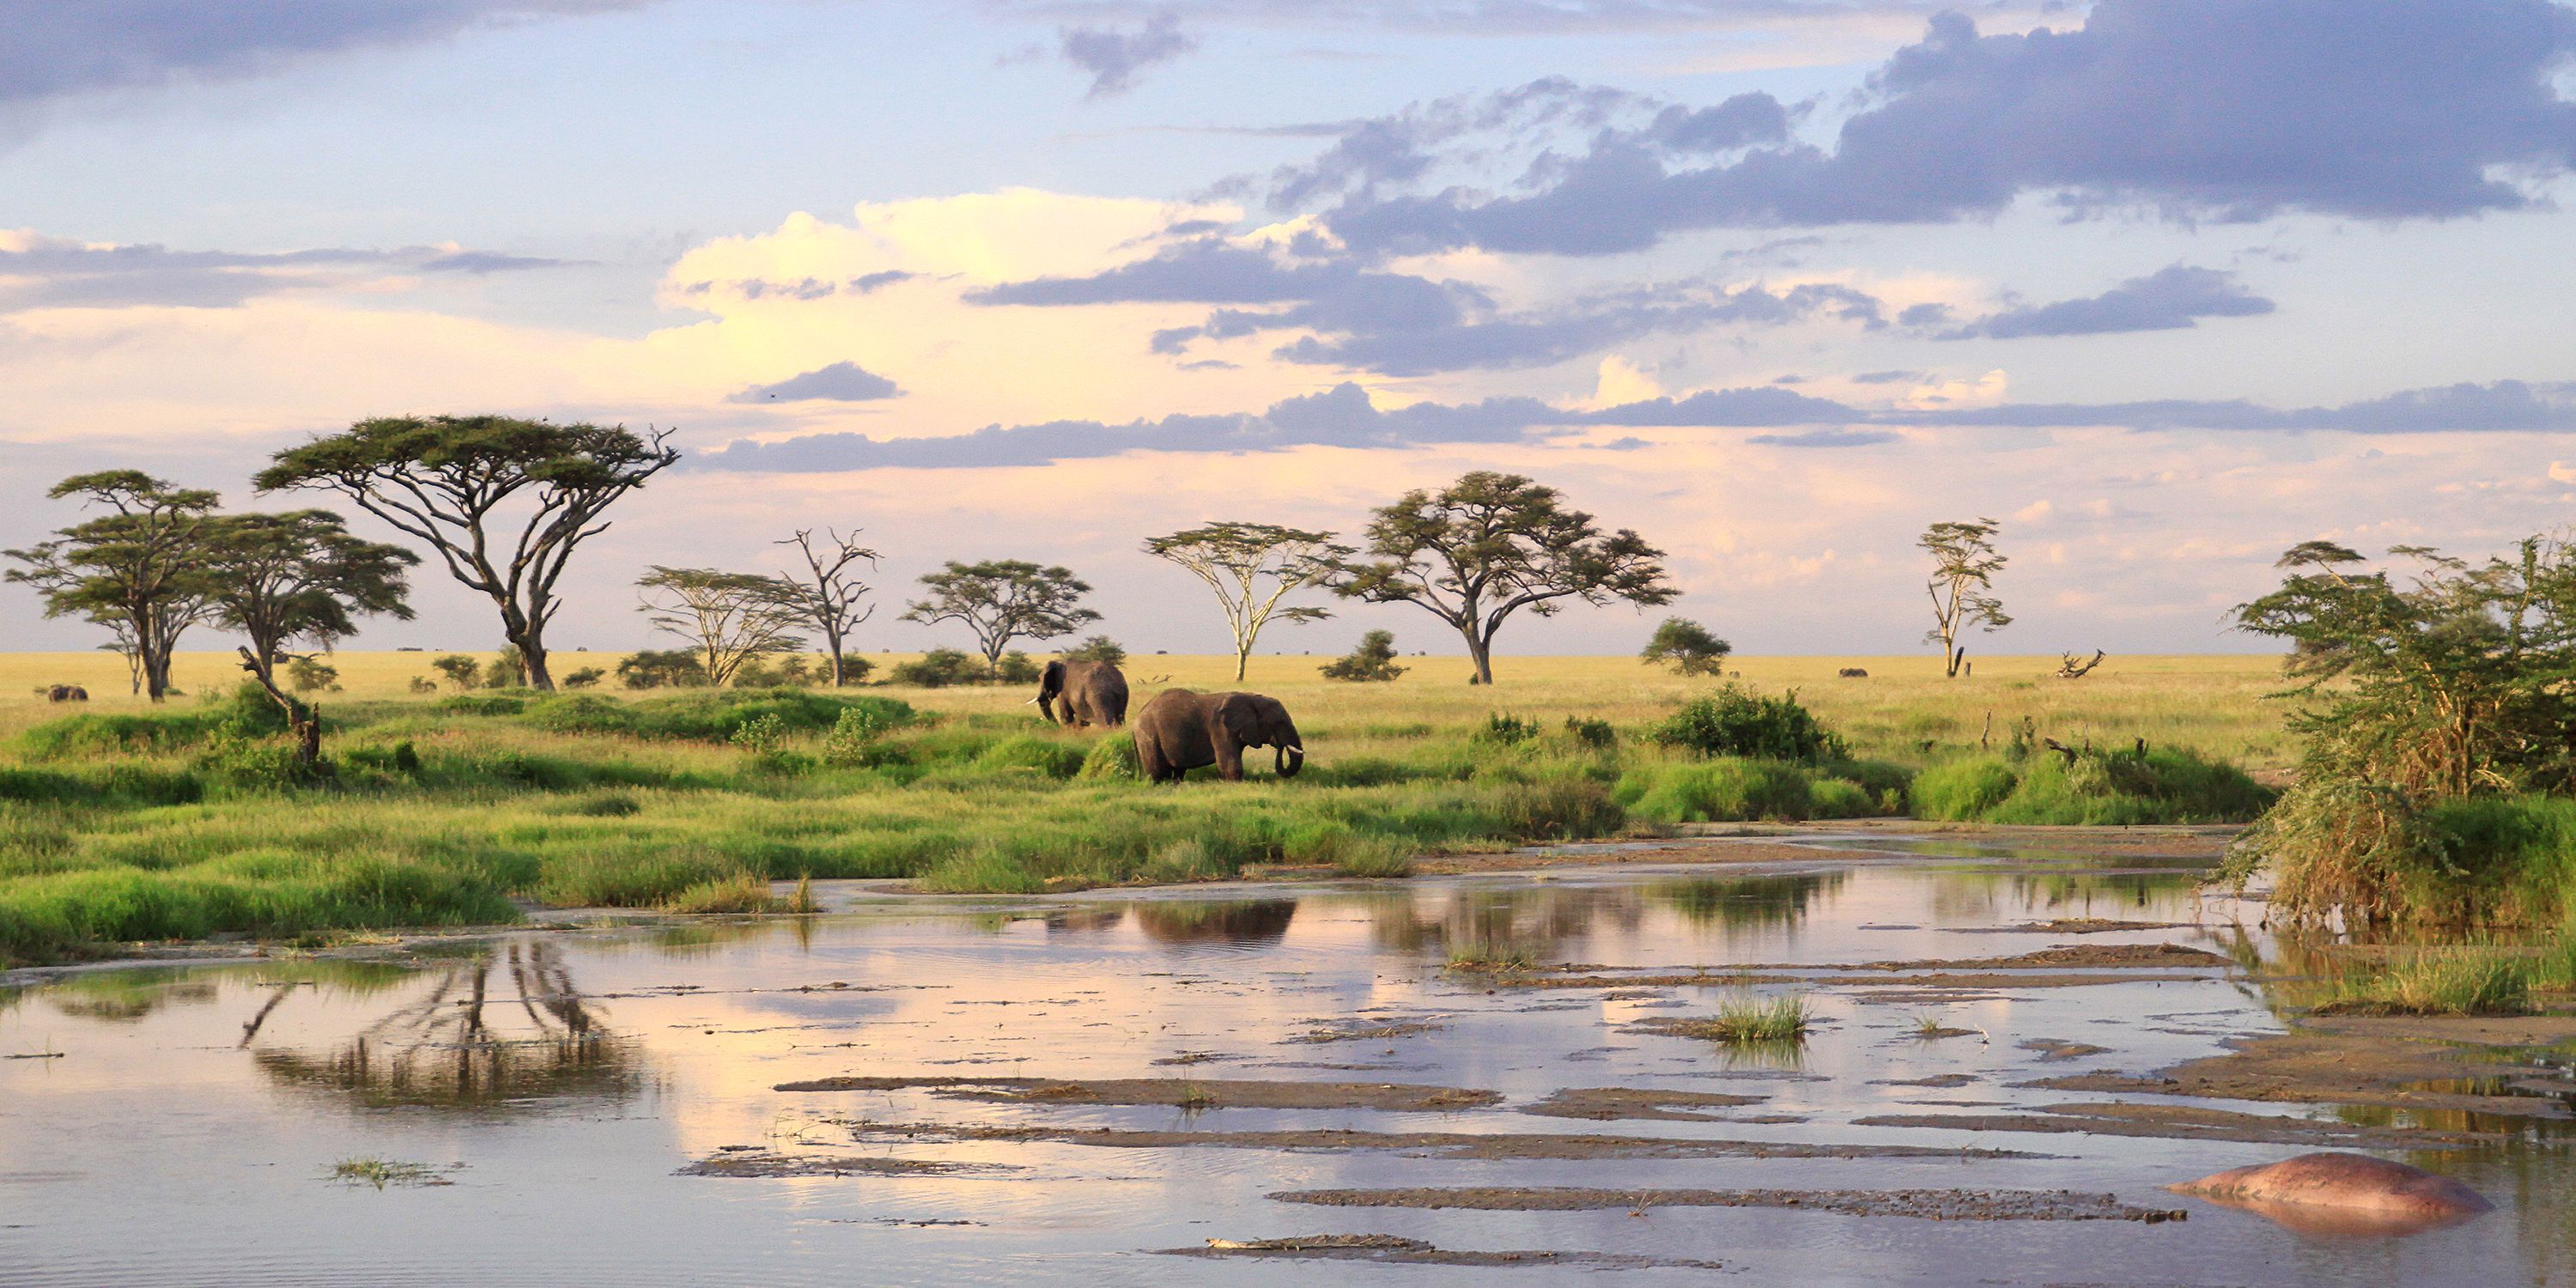 How to Plan a Trip to Serengeti National Park 